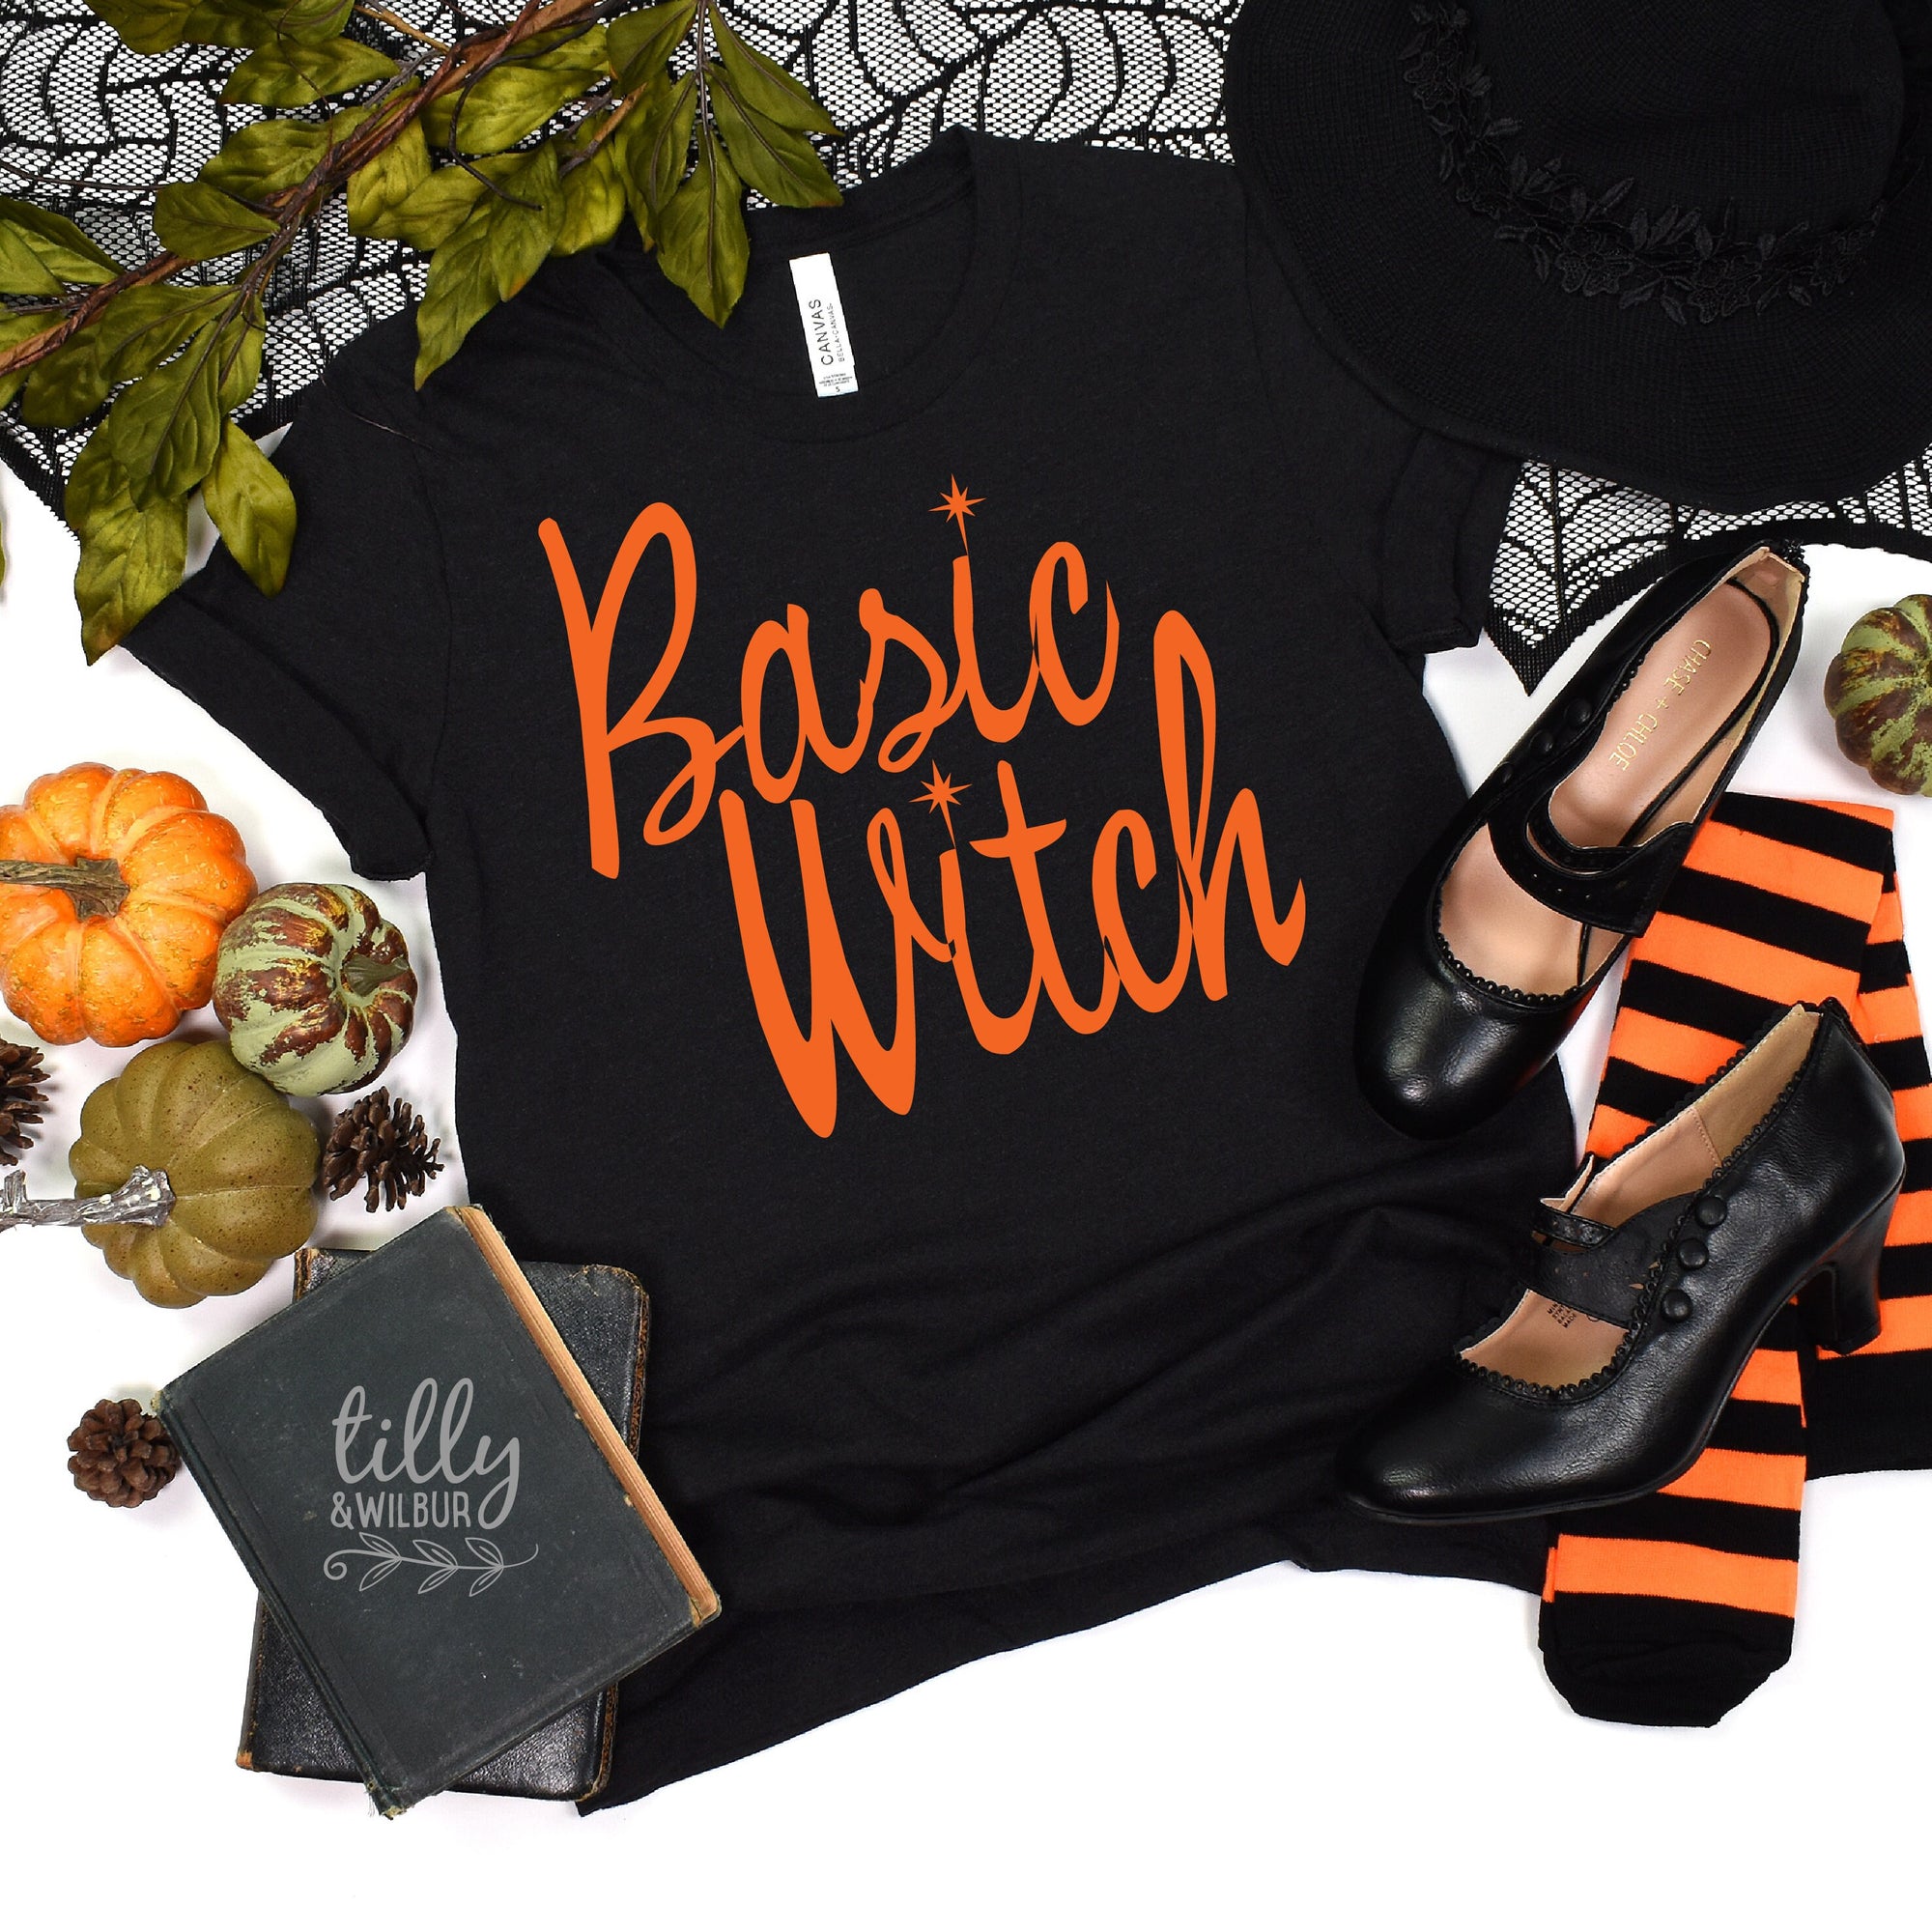 Basic Witch T-Shirt, Halloween T-Shirt, Witch Halloween Tee, Halloween Tee For Women, Ladies Halloween Shirt, Trick Or Treat, Costume Tee